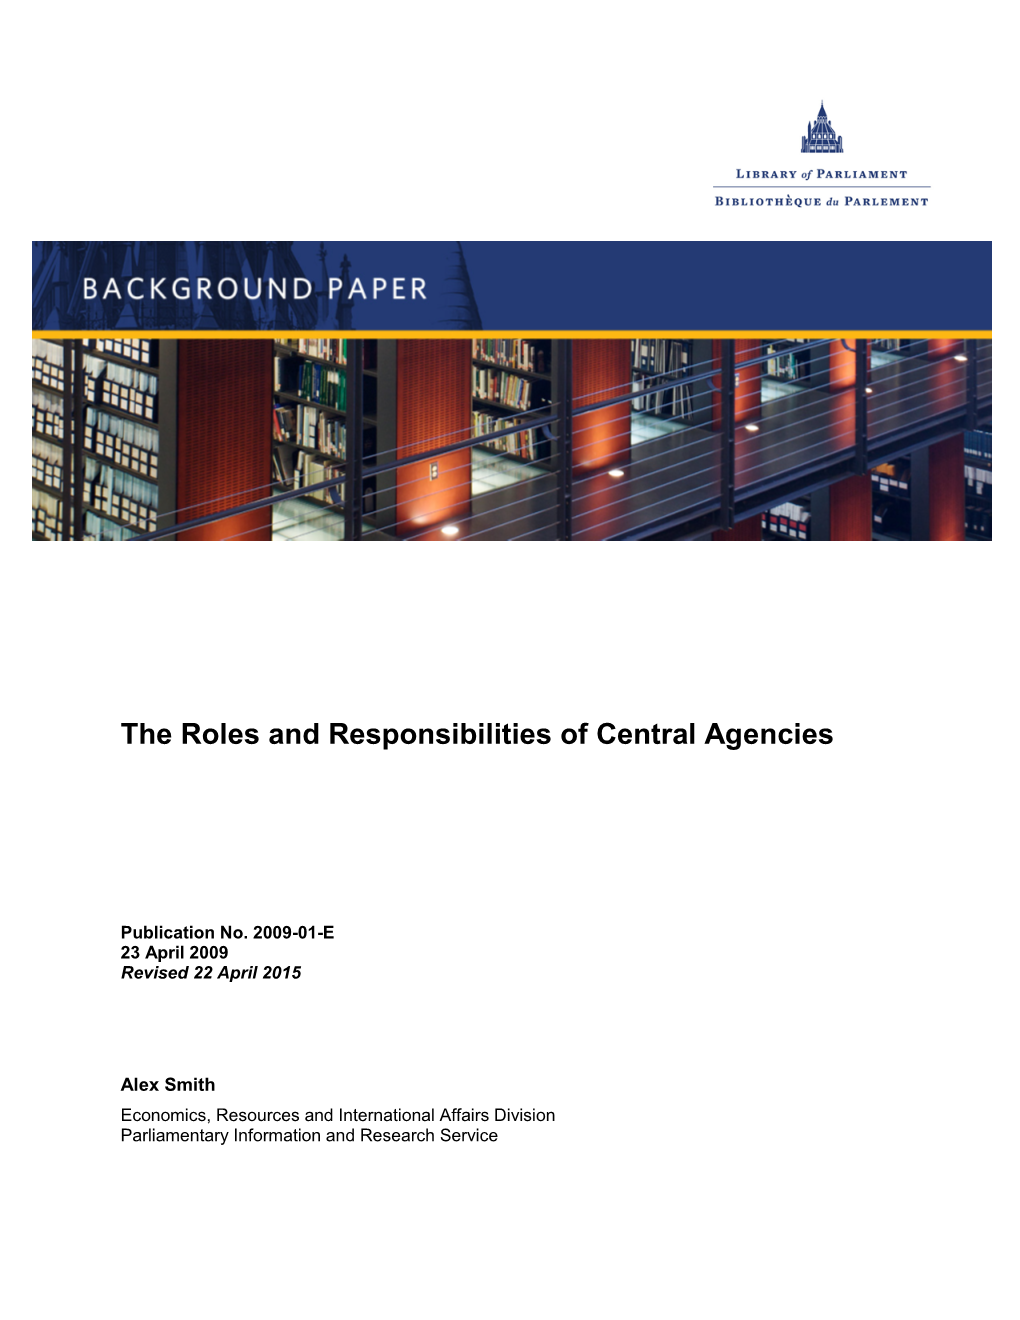 The Roles and Responsibilities of Central Agencies